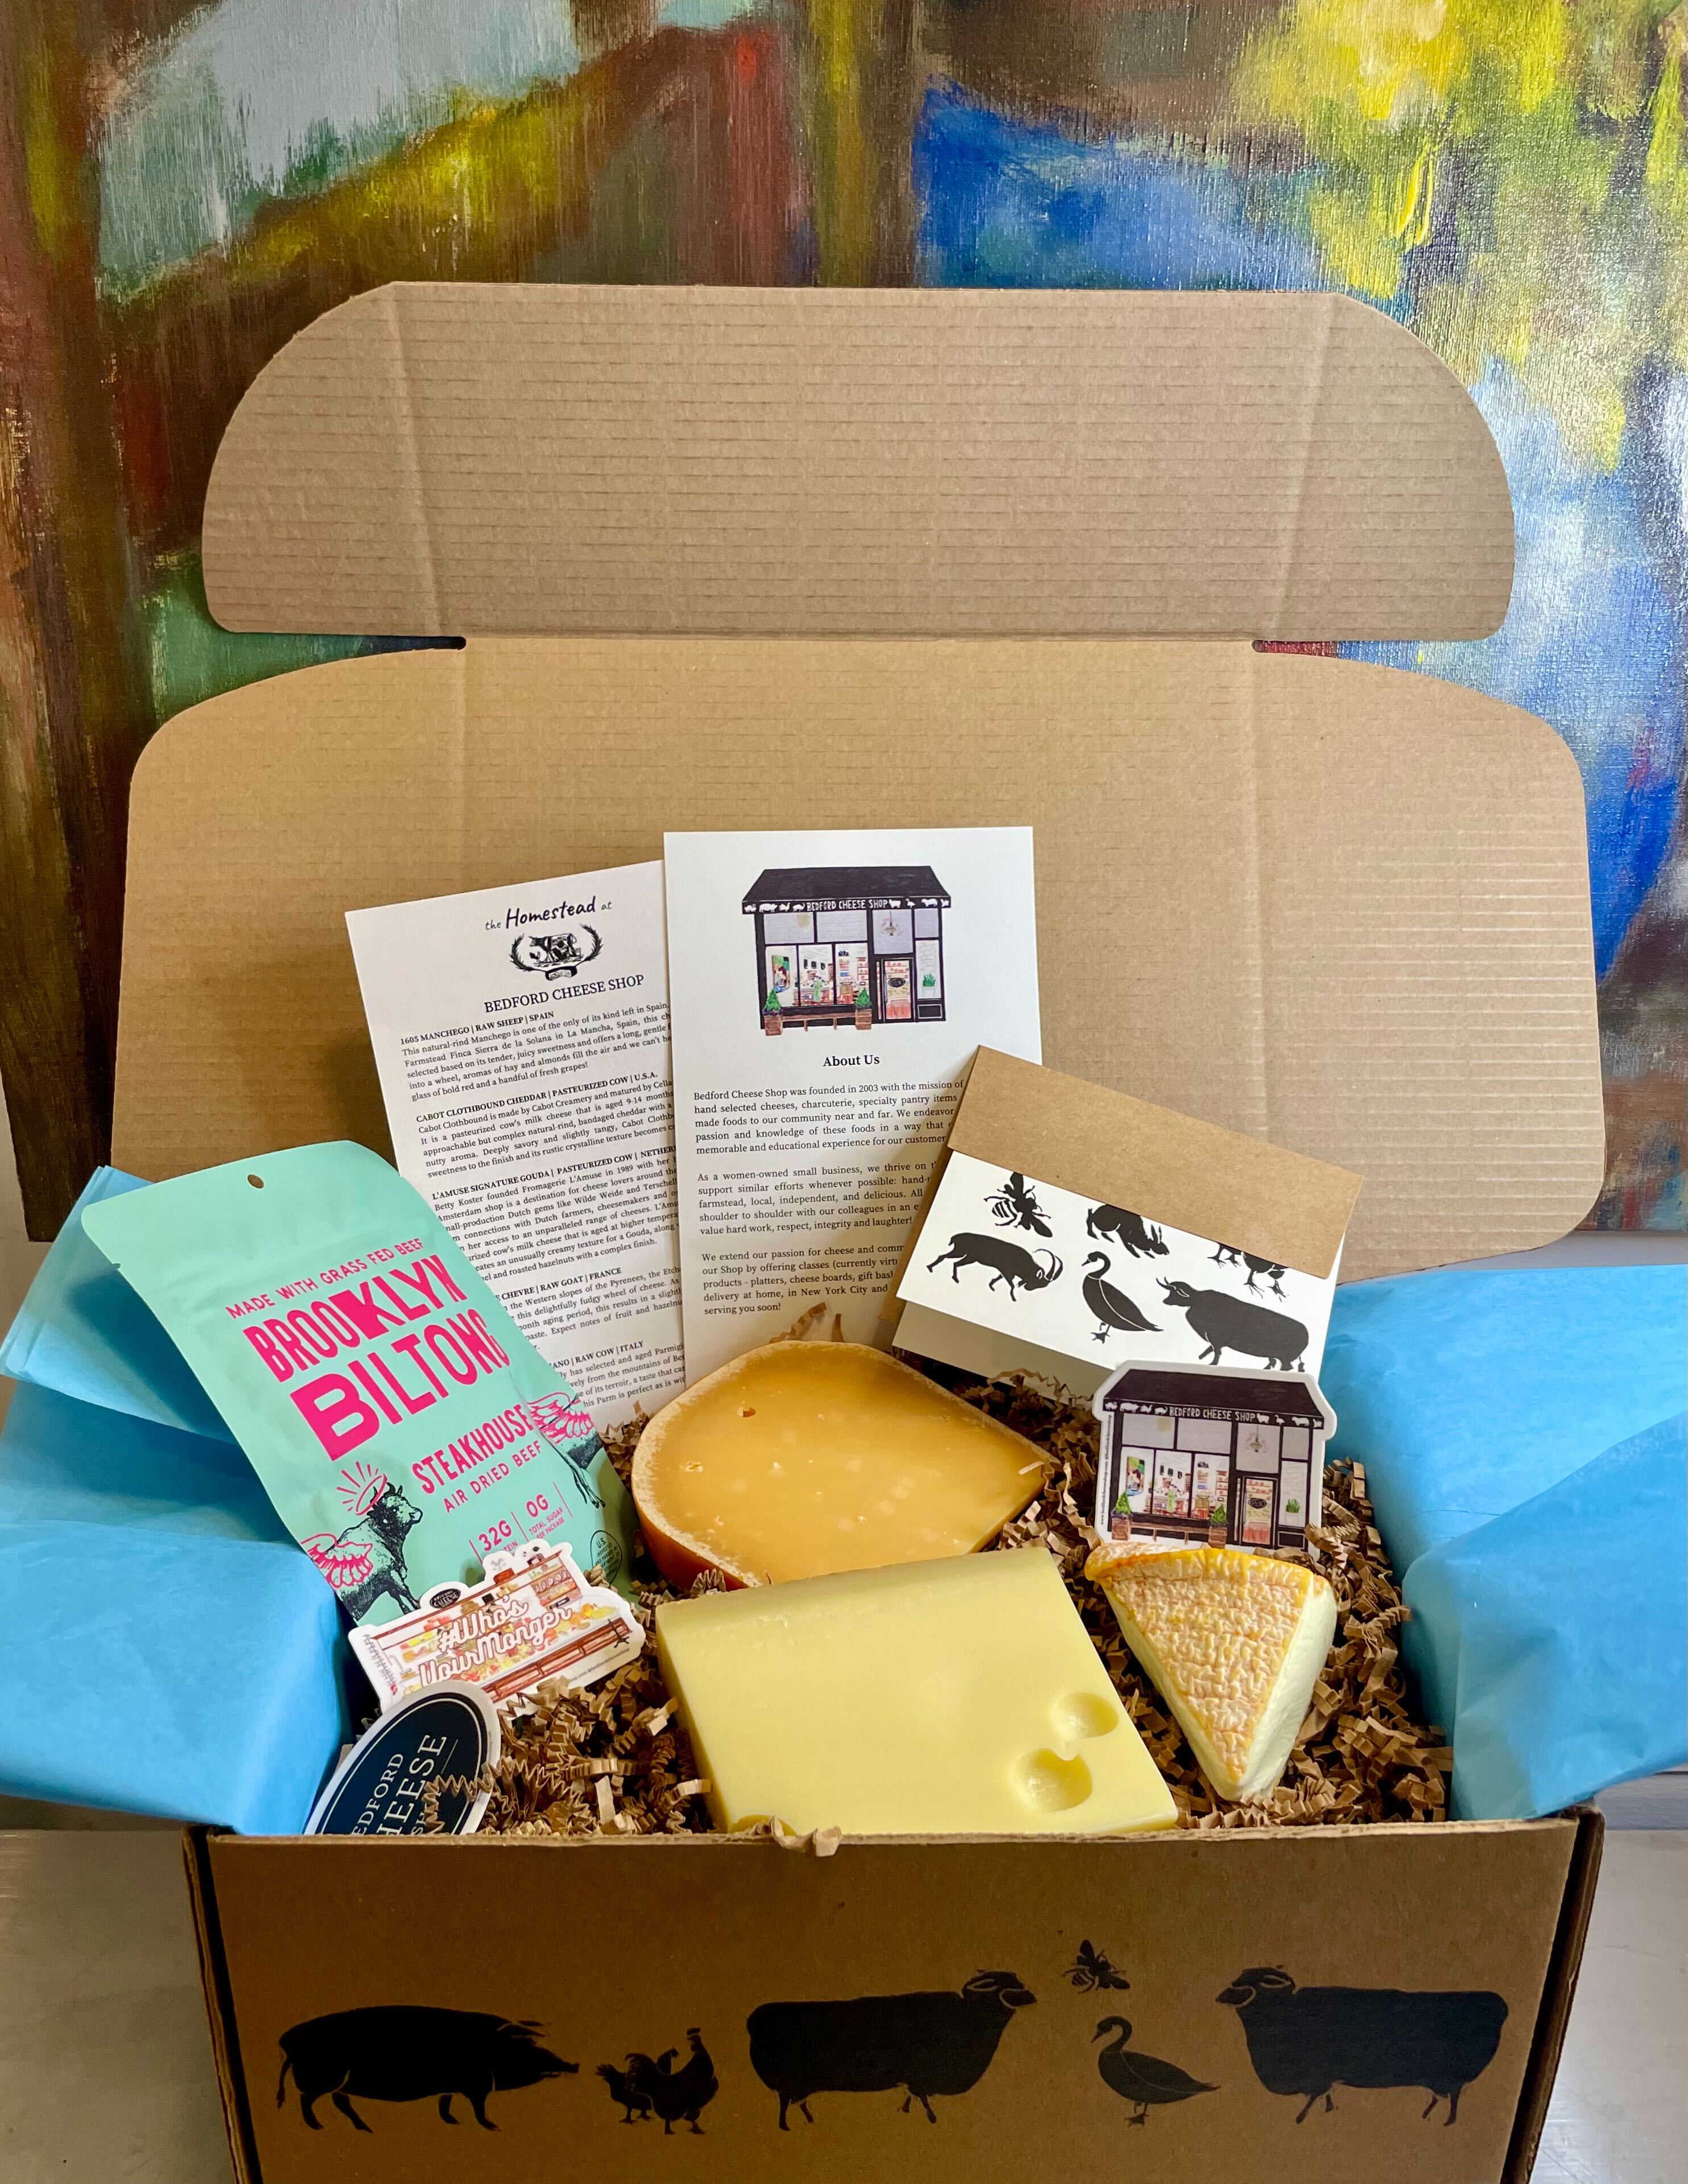 Image is of a monthly cheese fix subscription box. Depicted 3 hunks of cheese, jam, and BCS postcard nestled in brown crinkle paper inside of a BCS printed box.